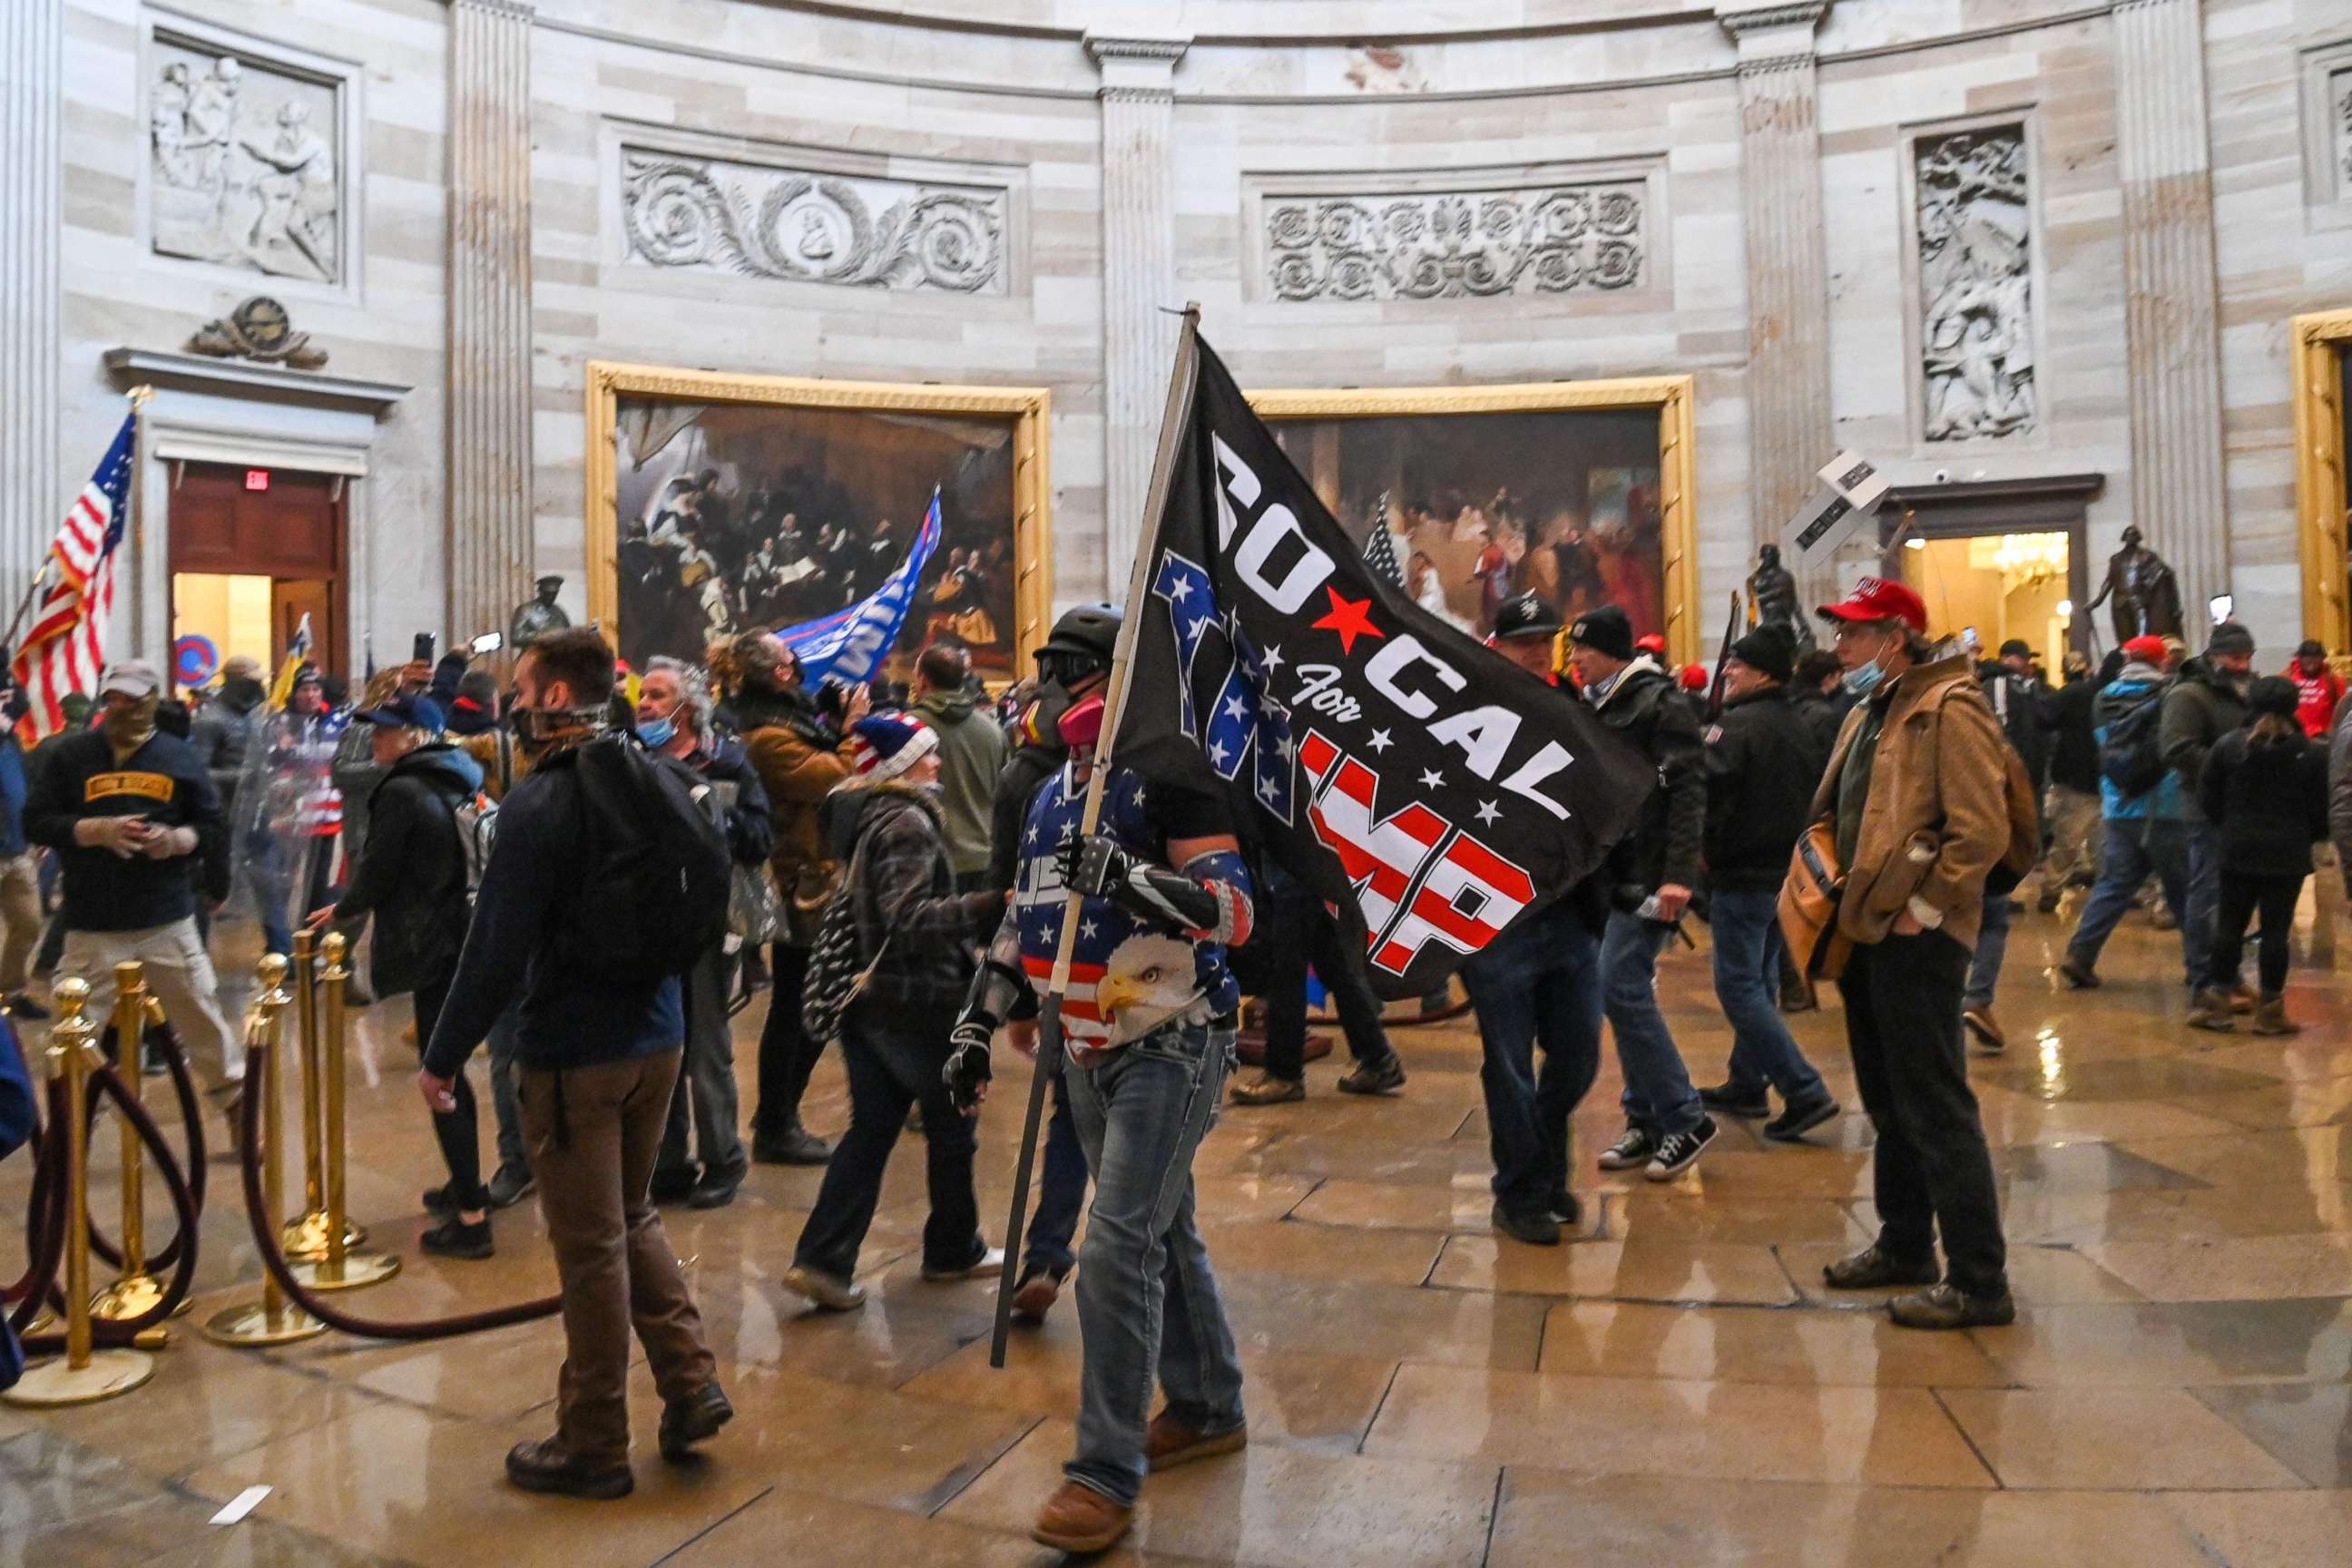 PHOTO: Supporters of President Donald Trump roam under the Capitol Rotunda after invading the Capitol building on Jan. 6, 2021, in Washington, D.C.